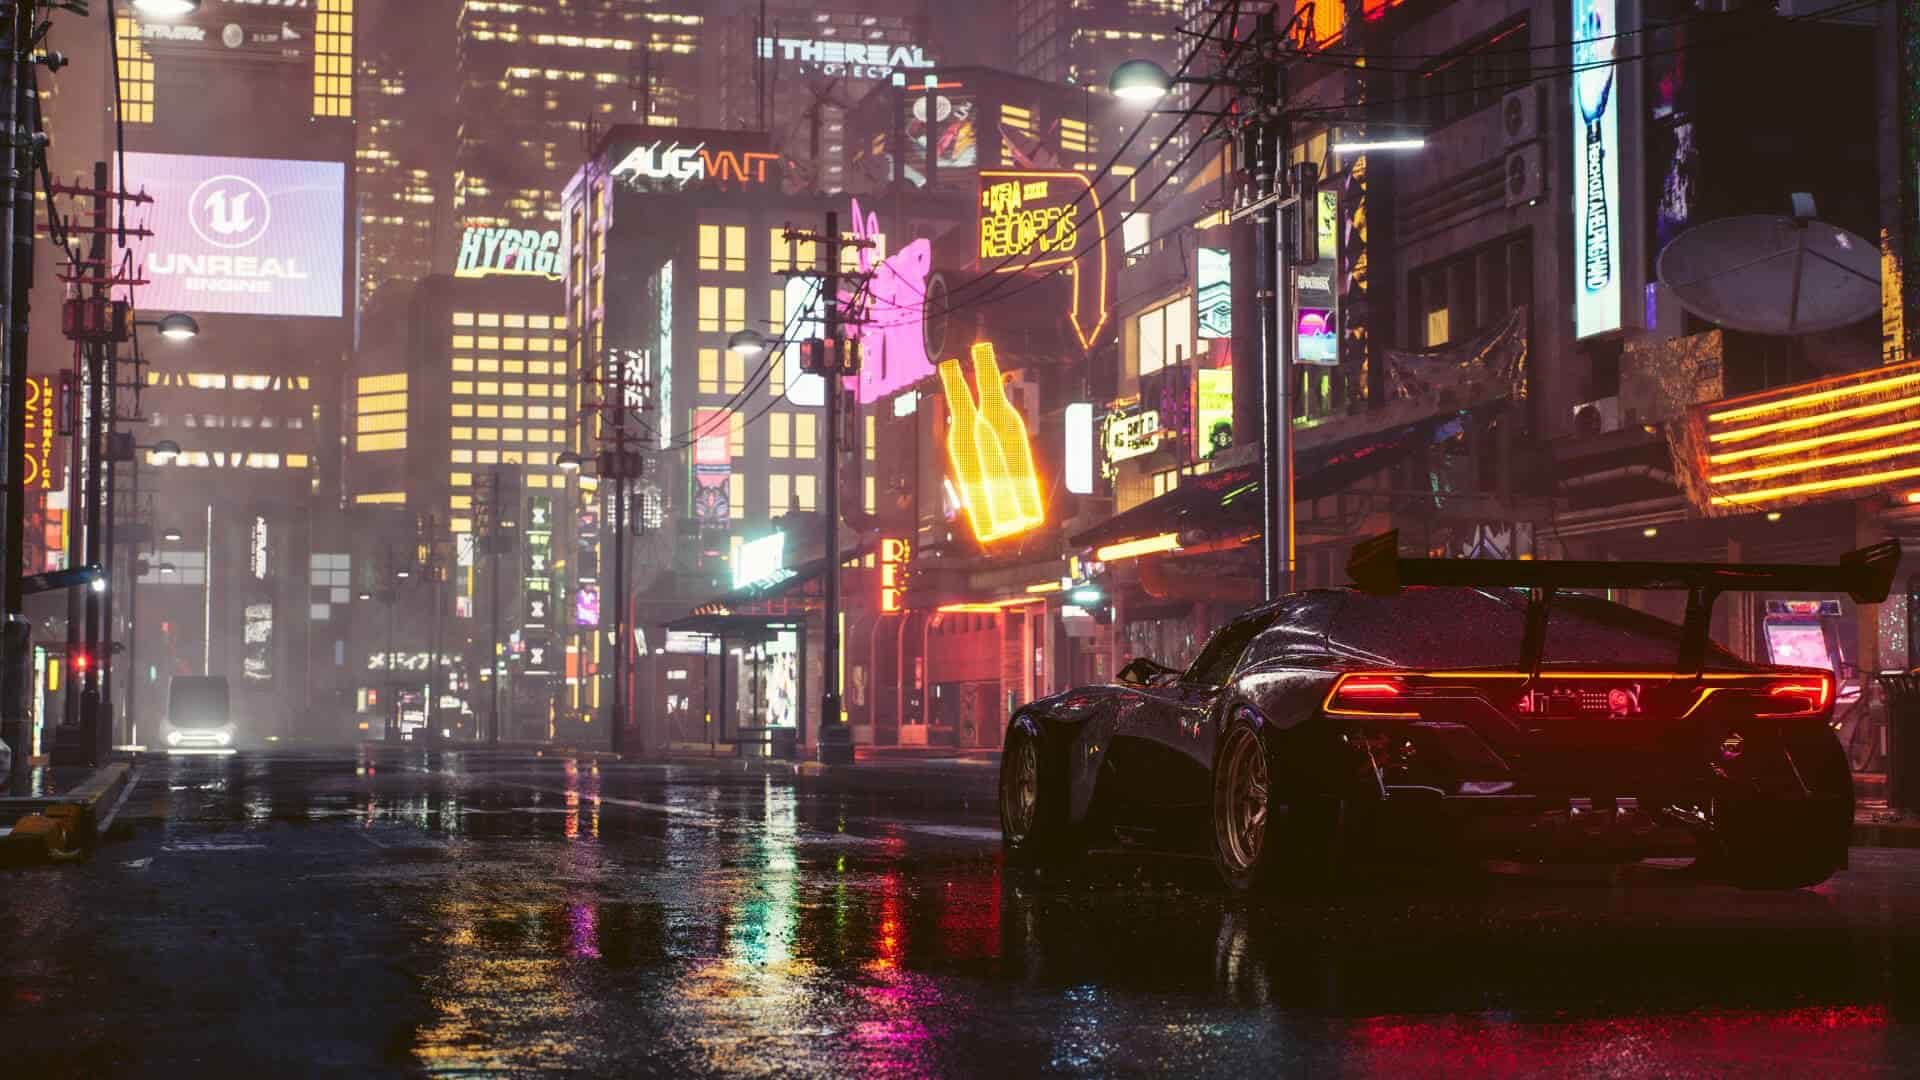 an visualisation of a neighbourhood at night with flashy signboards and a sports car next to the buildings